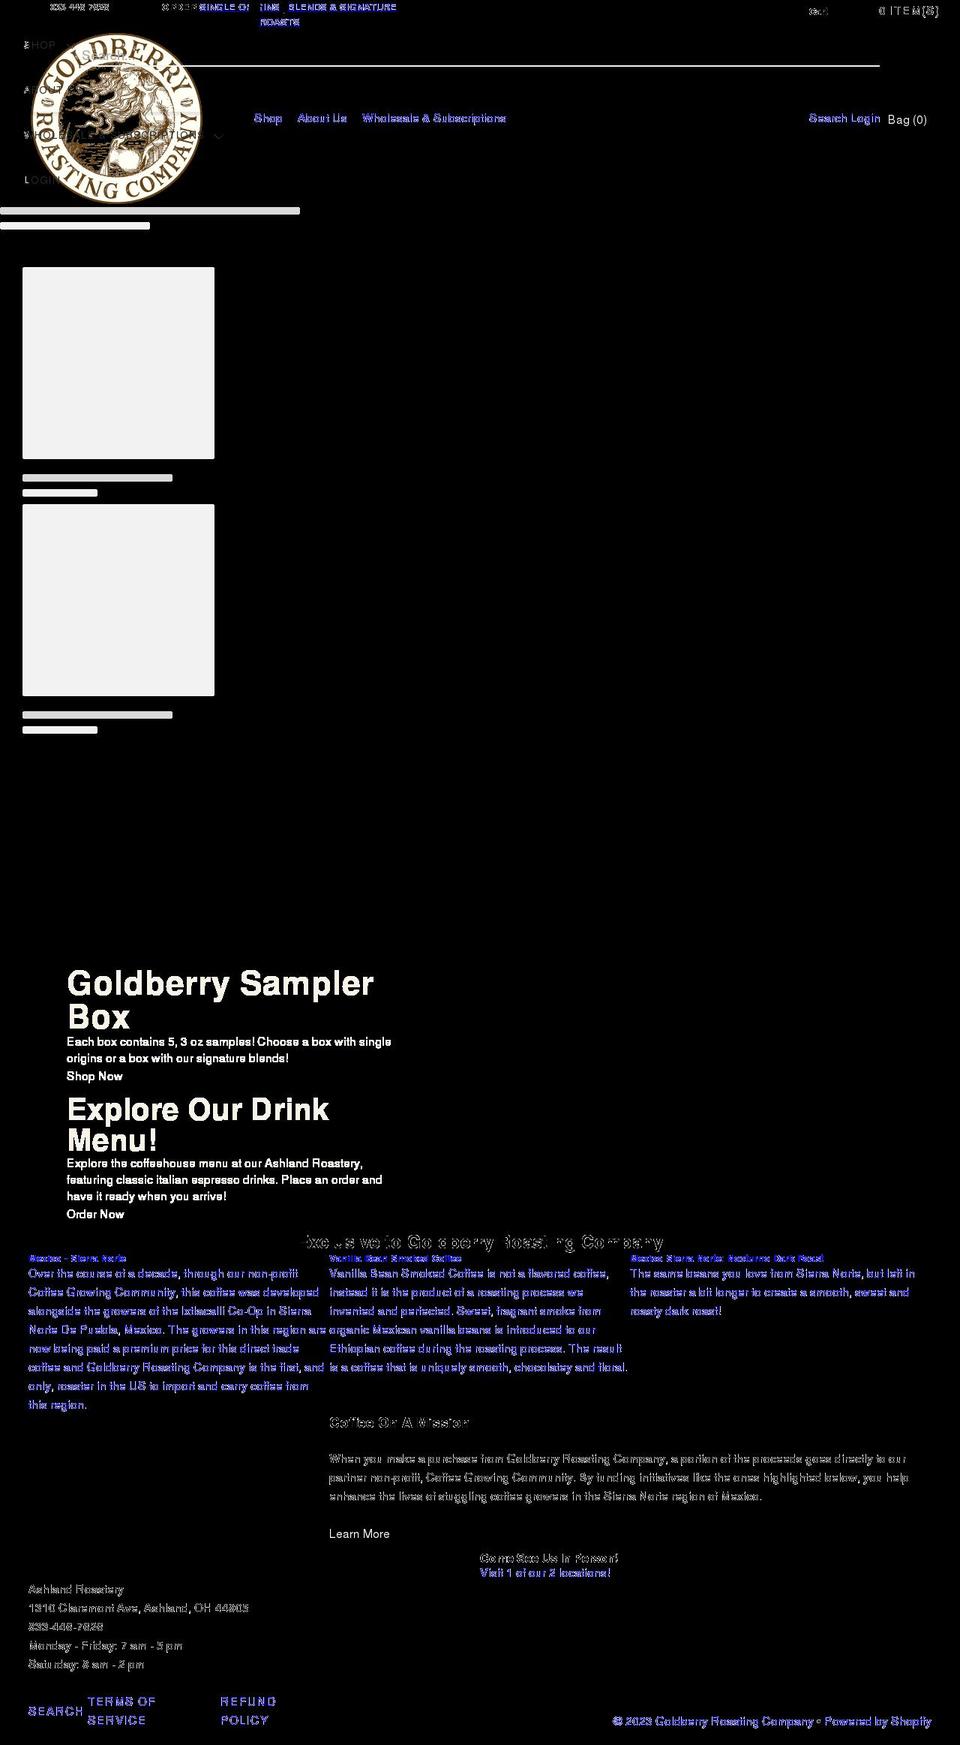 Foodie Shopify theme site example goldberryroasting.com